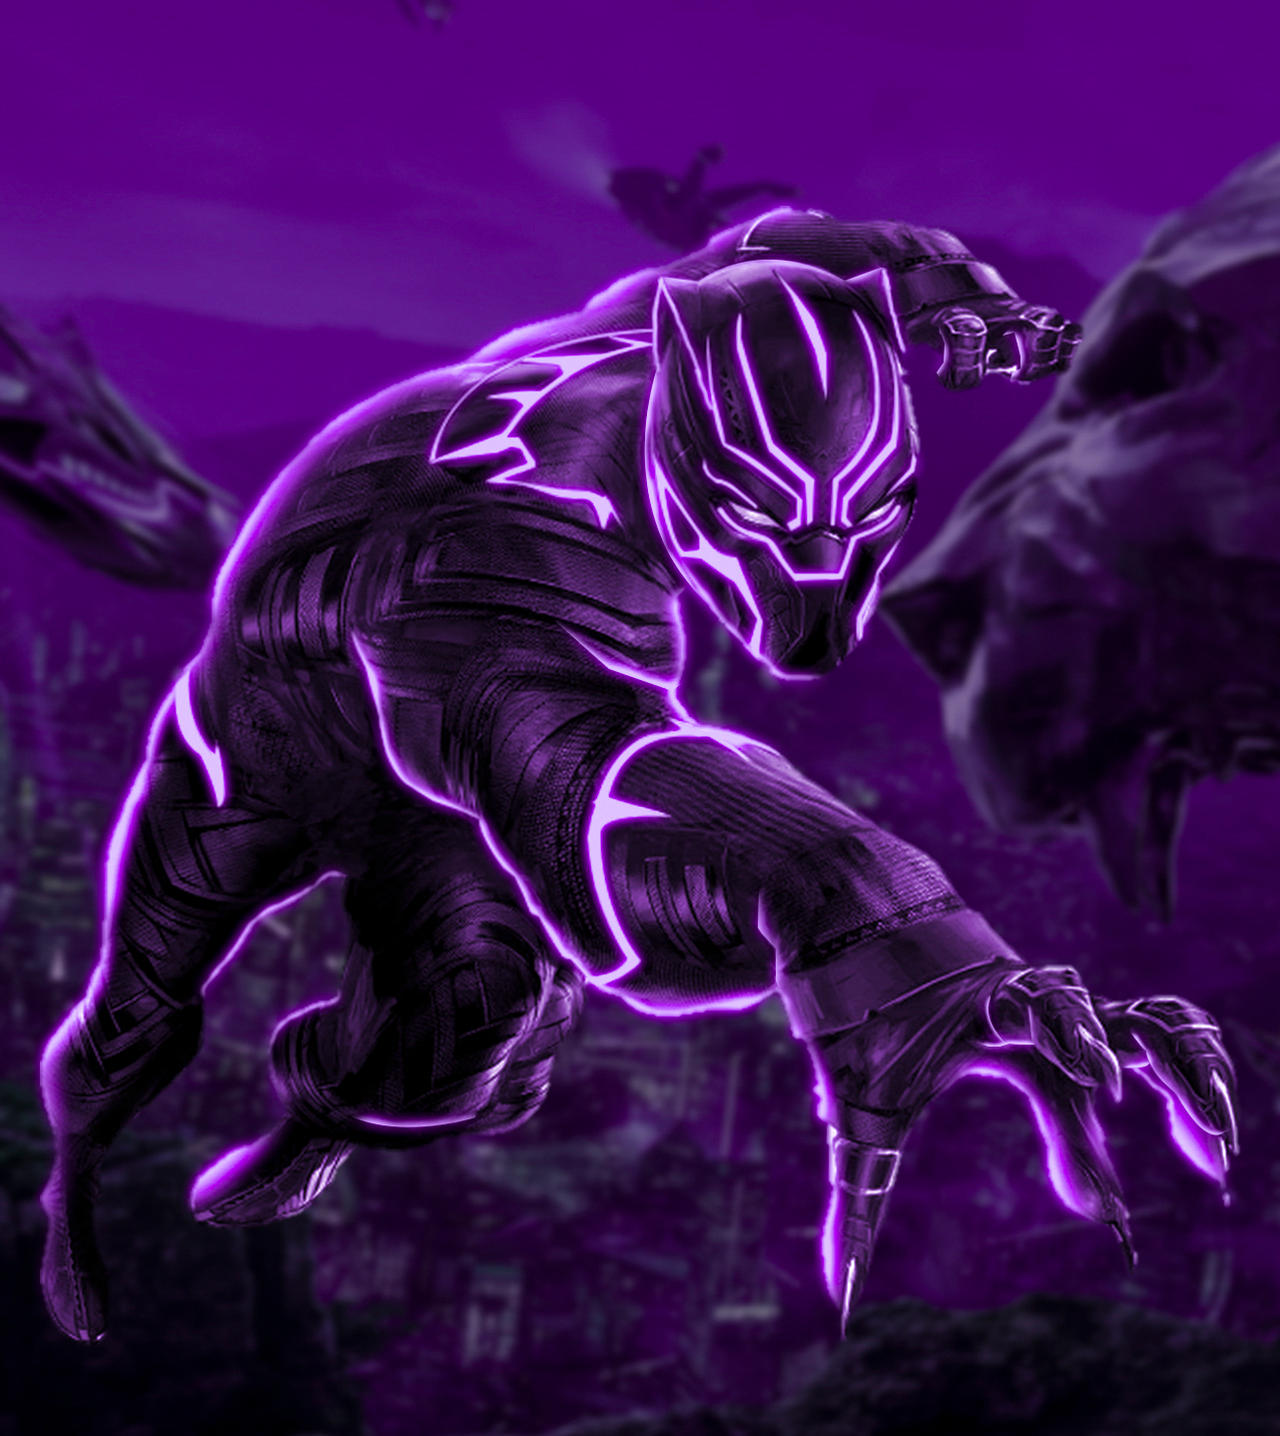  Black  panther  glowing  v2 by itsharman on DeviantArt